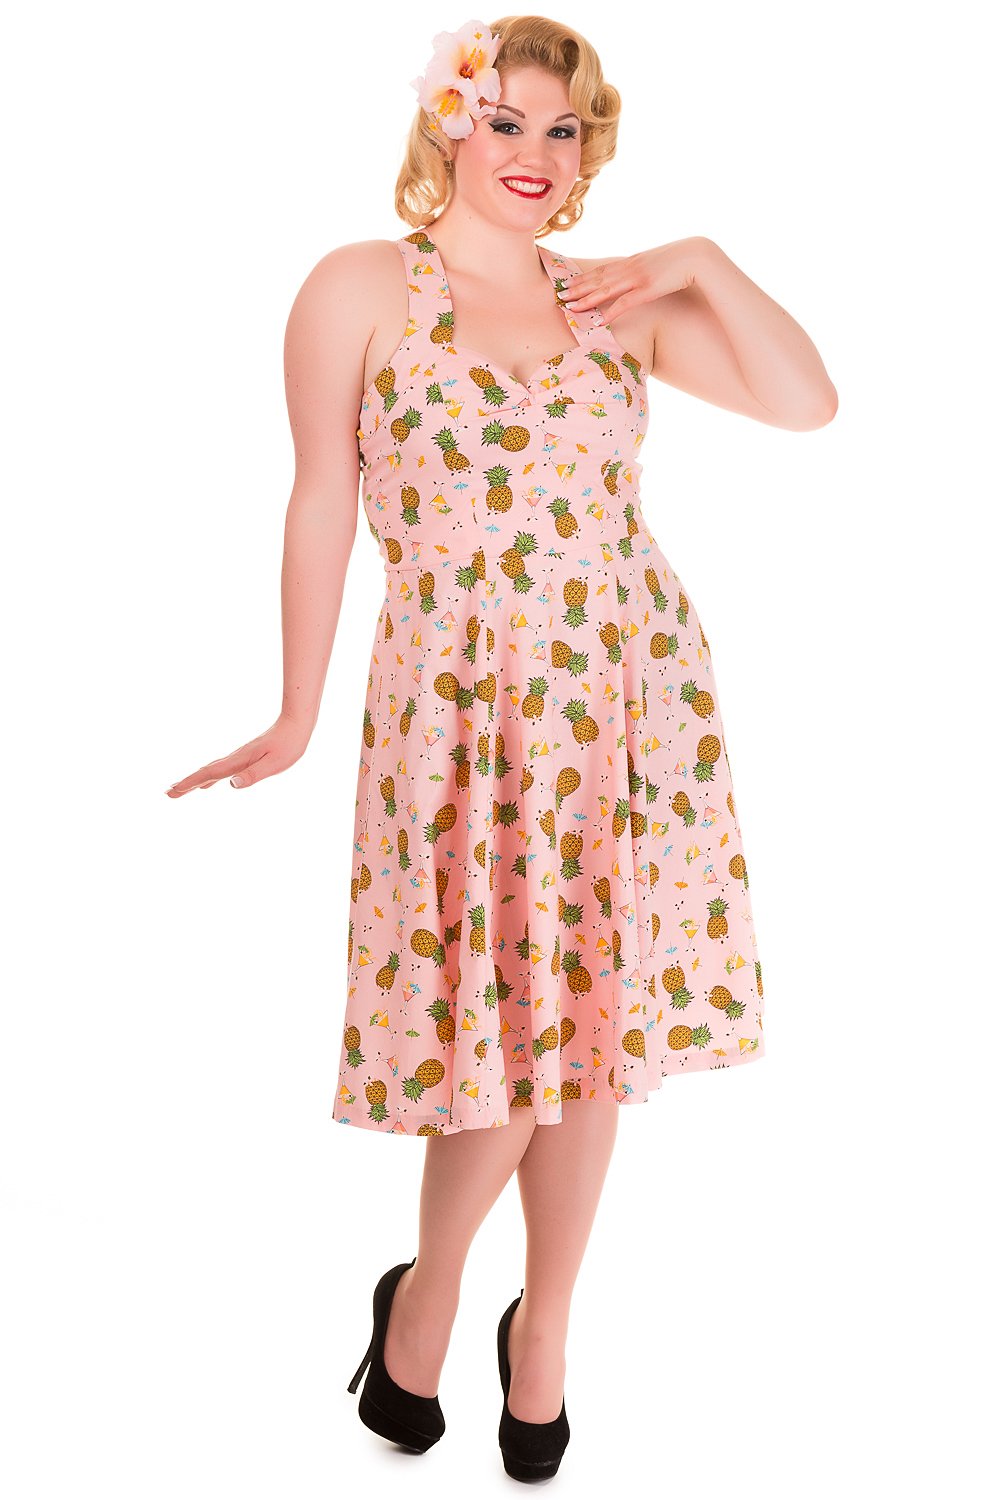 Banned This Love Pineapple Plus Size Dress